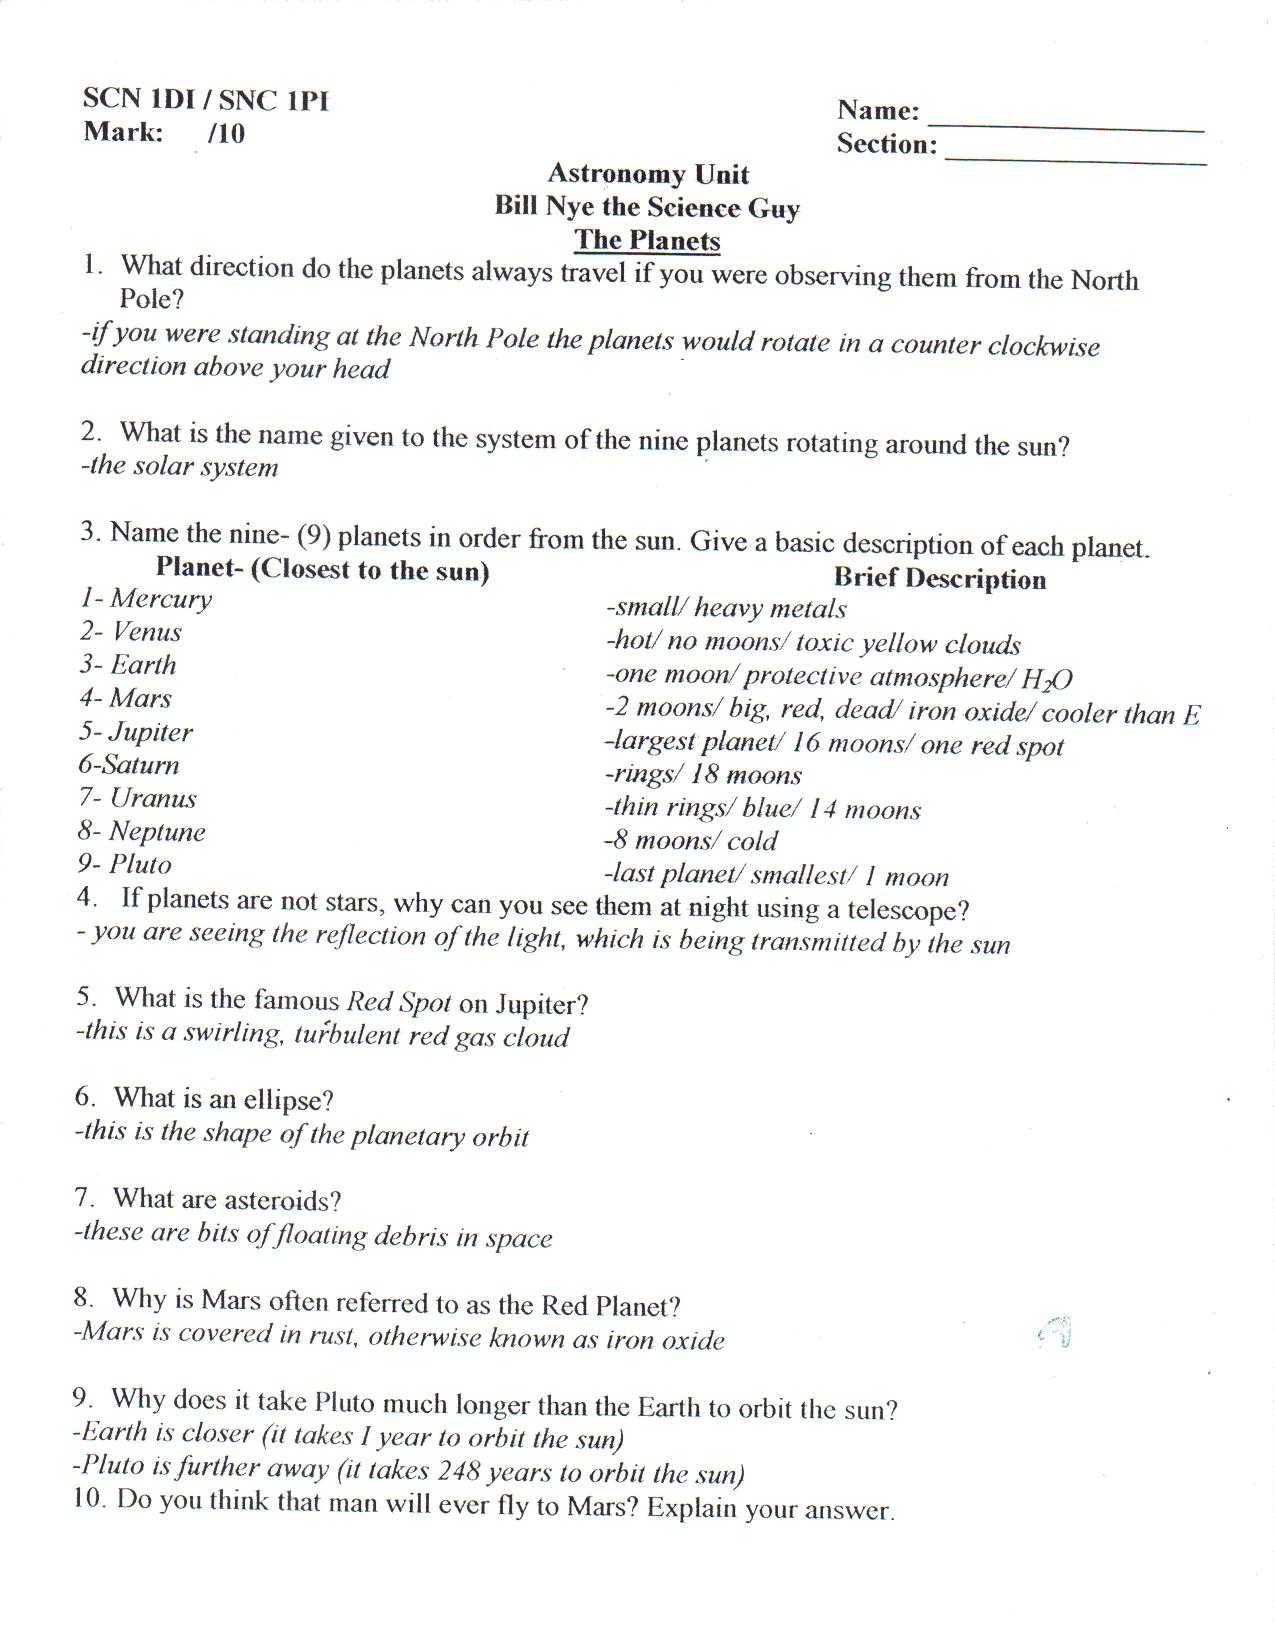 The History Of Life On Earth Worksheet Answers with Earth In Space Worksheet Answer Key the Best Worksheets Image